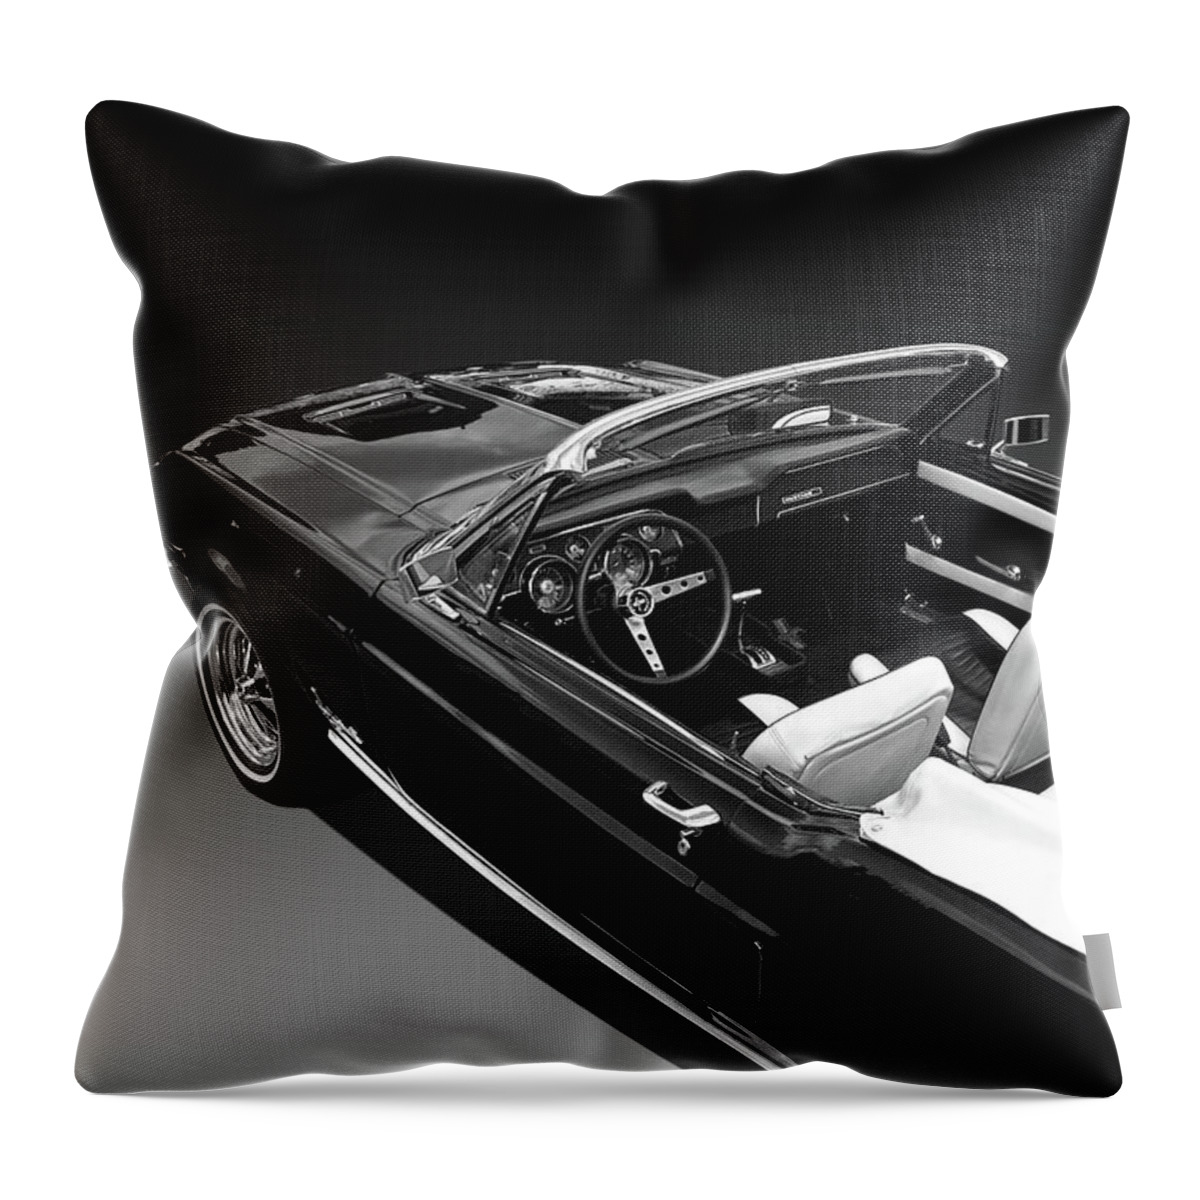 1968 Mustang Convertible Interior In Black And White Throw Pillow